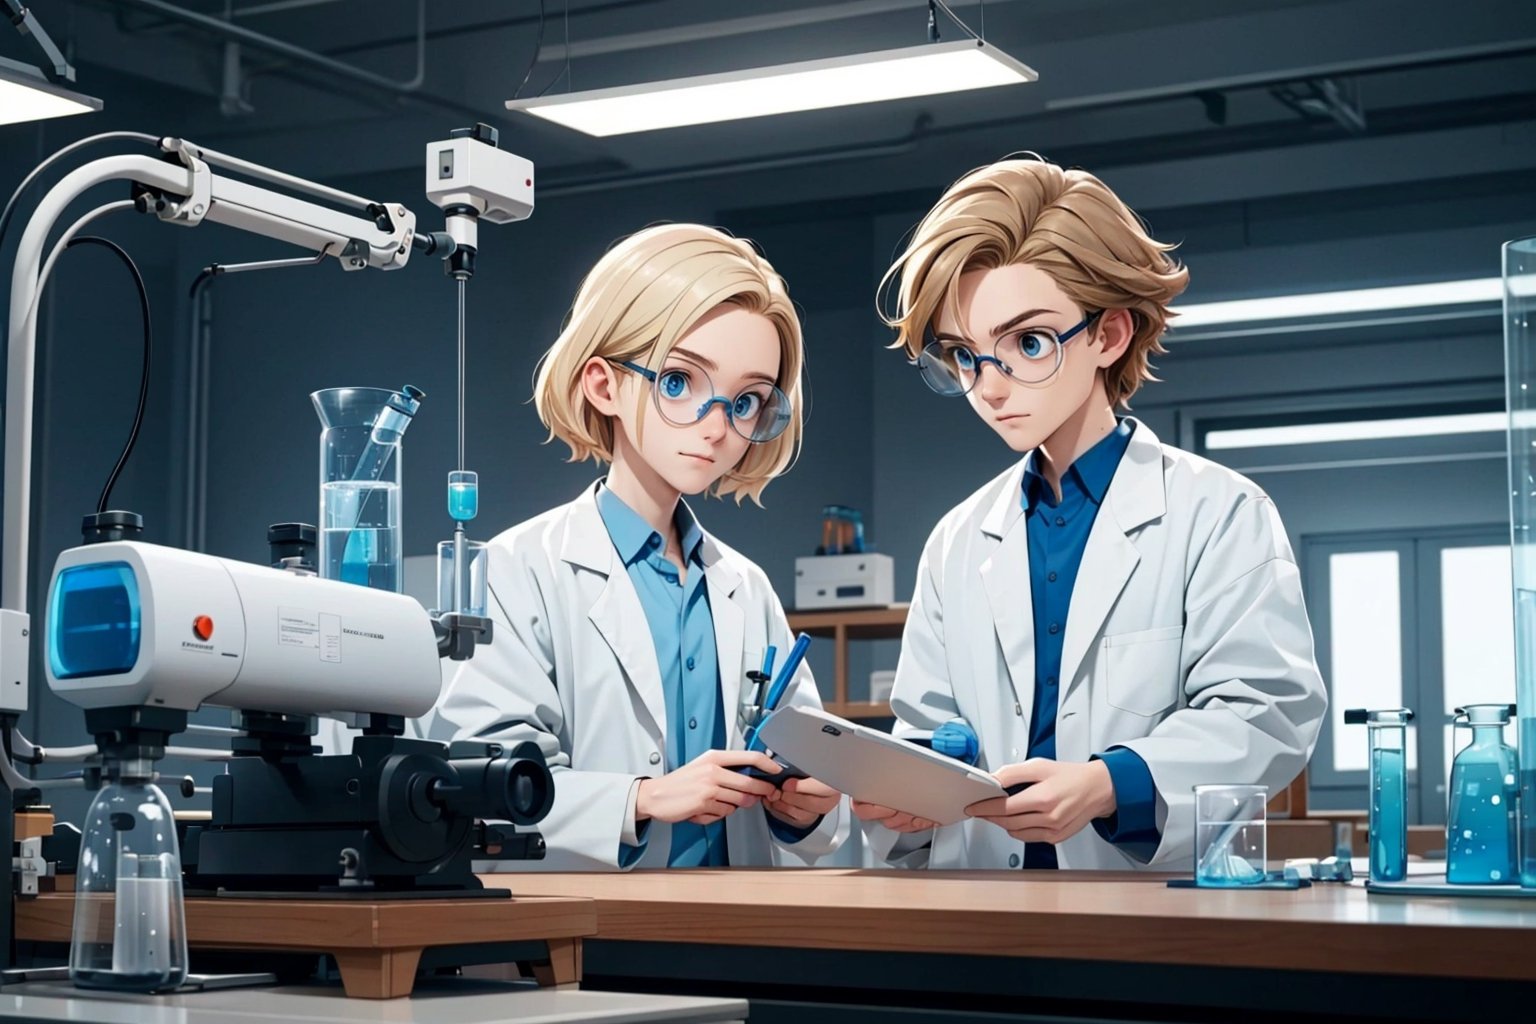 A drawing in western animation style with flat colors and hard lines. A young scientist with short wavy blond hair and blue eyes is wearing a blue shirt and a lab coat and goggles. The scientist sitting on the left of the image with a lab bench in the foreground, and there is lots of science equipment on the bench.